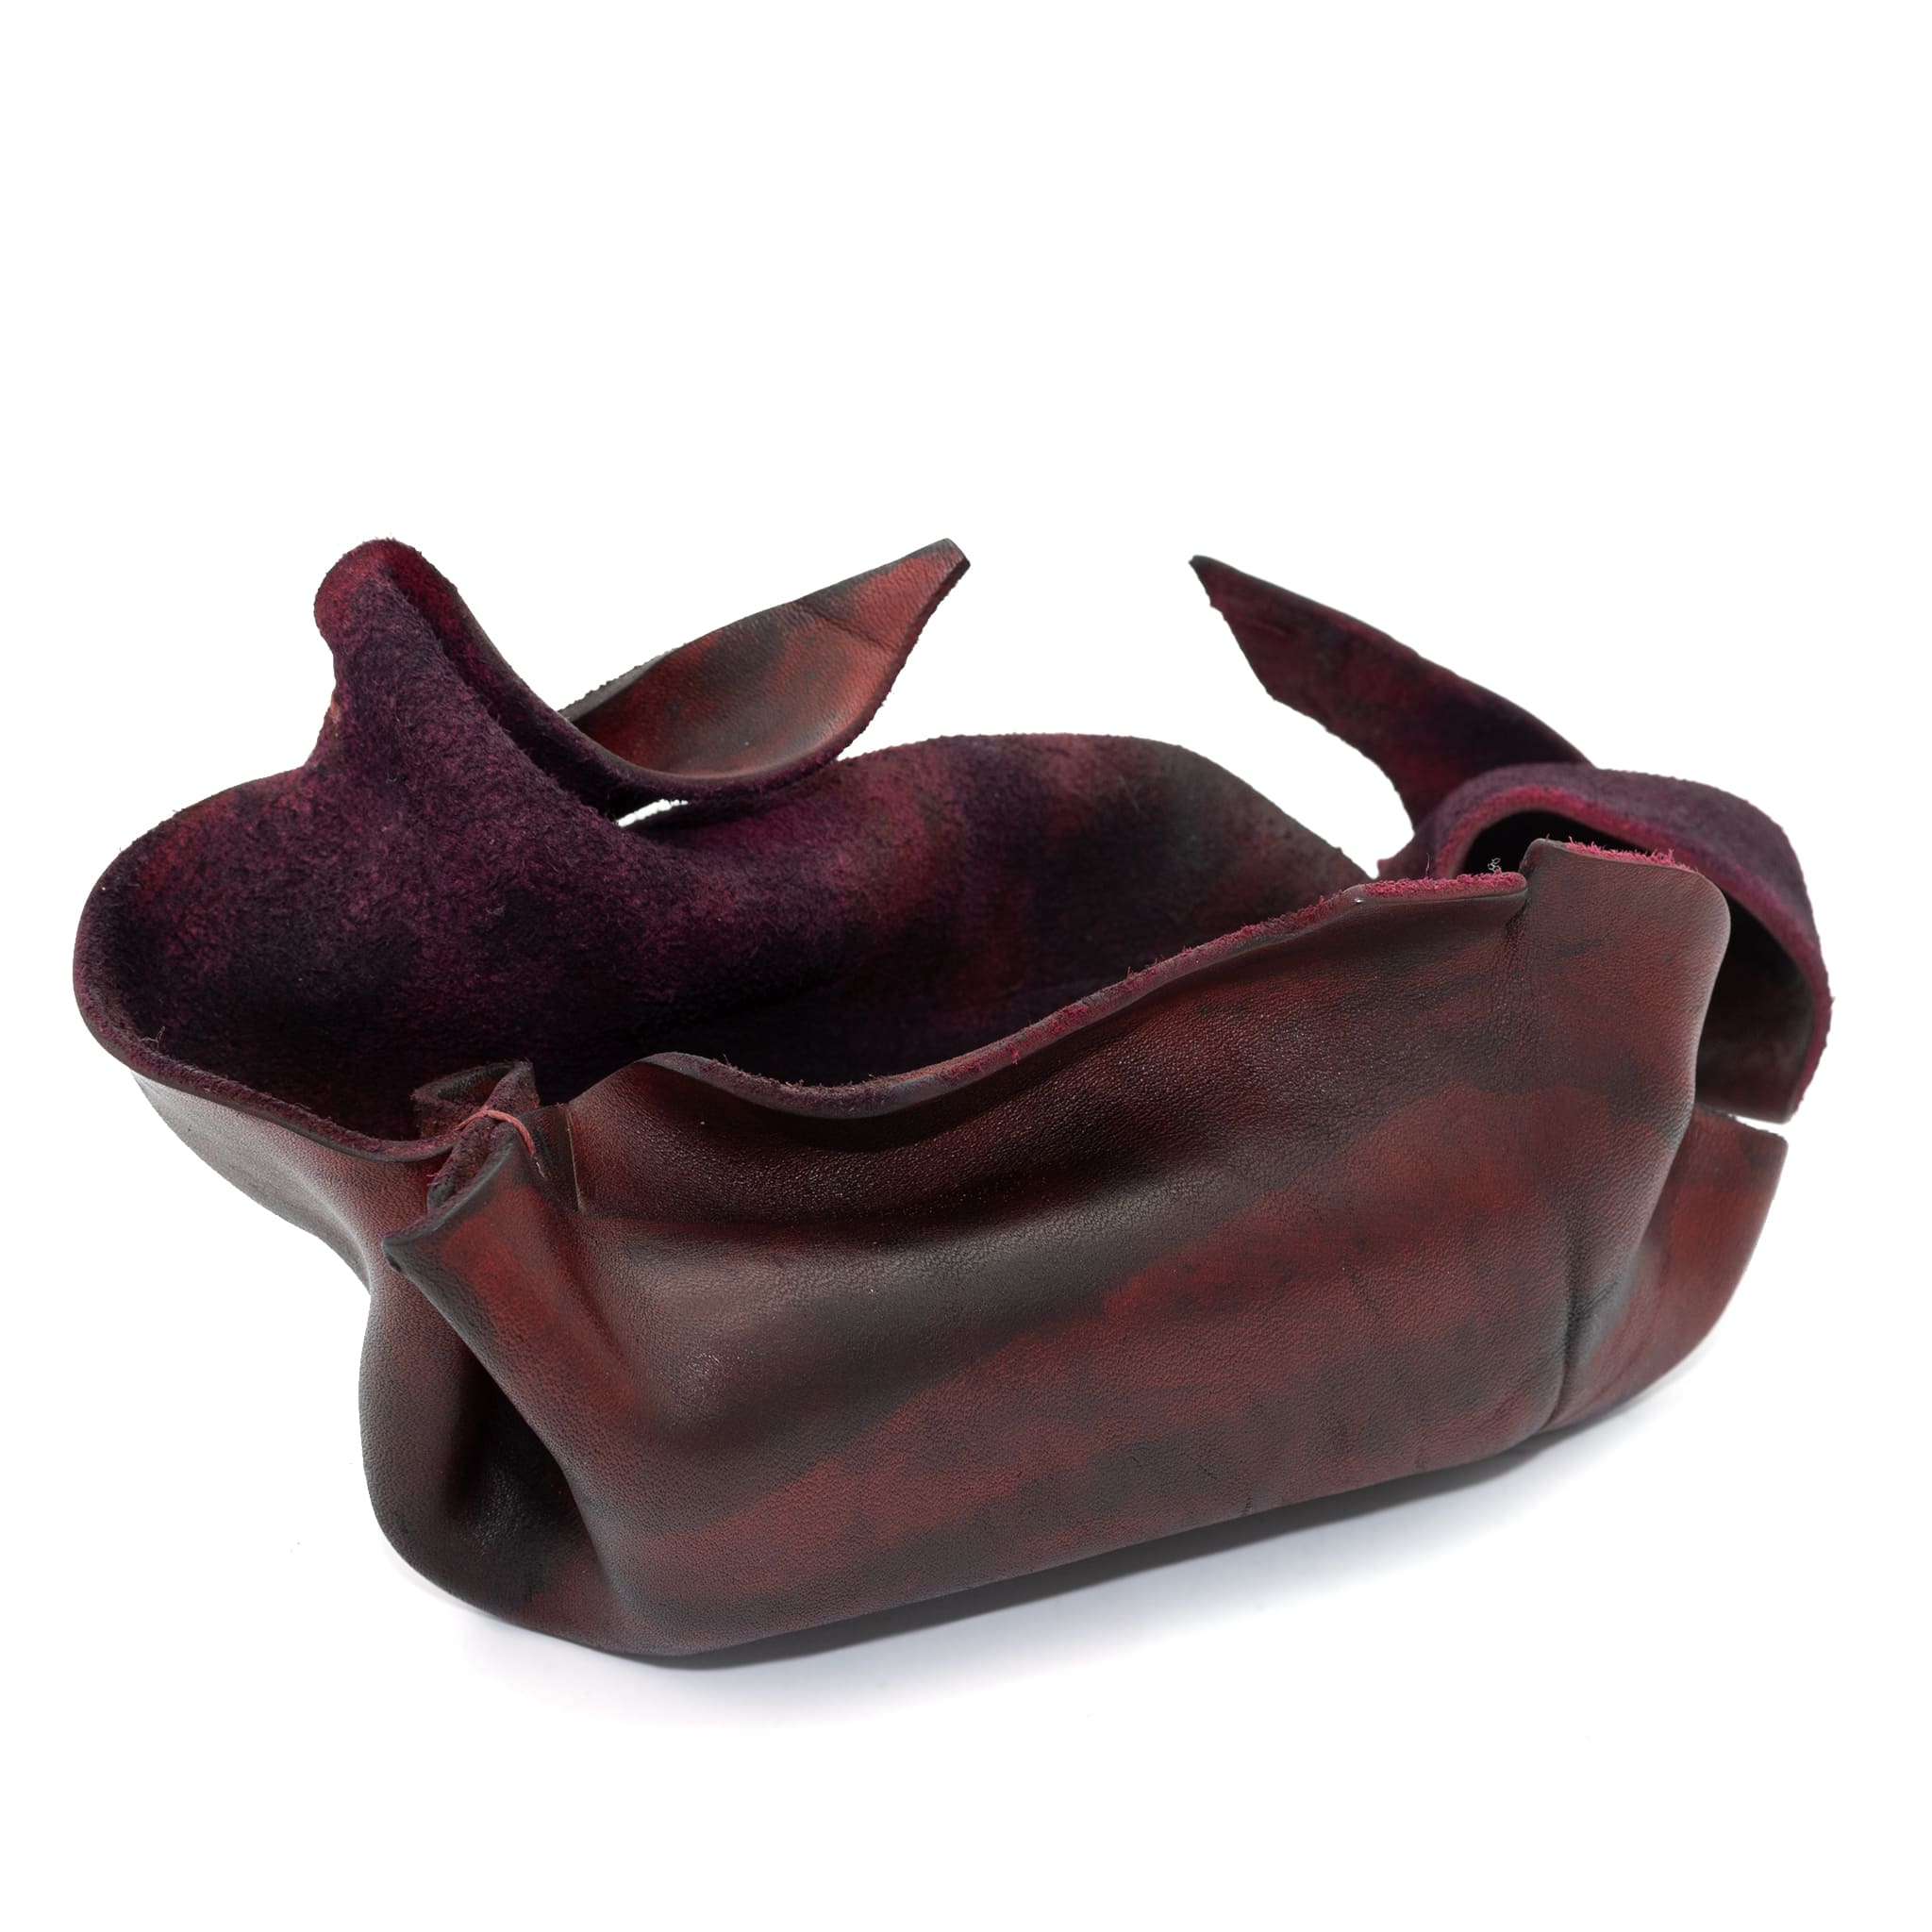 wet moulded and hand dyed abstract italian horse culatta leather jewellery trays, entirely hand crafted by uk based independent designer atelier skn.